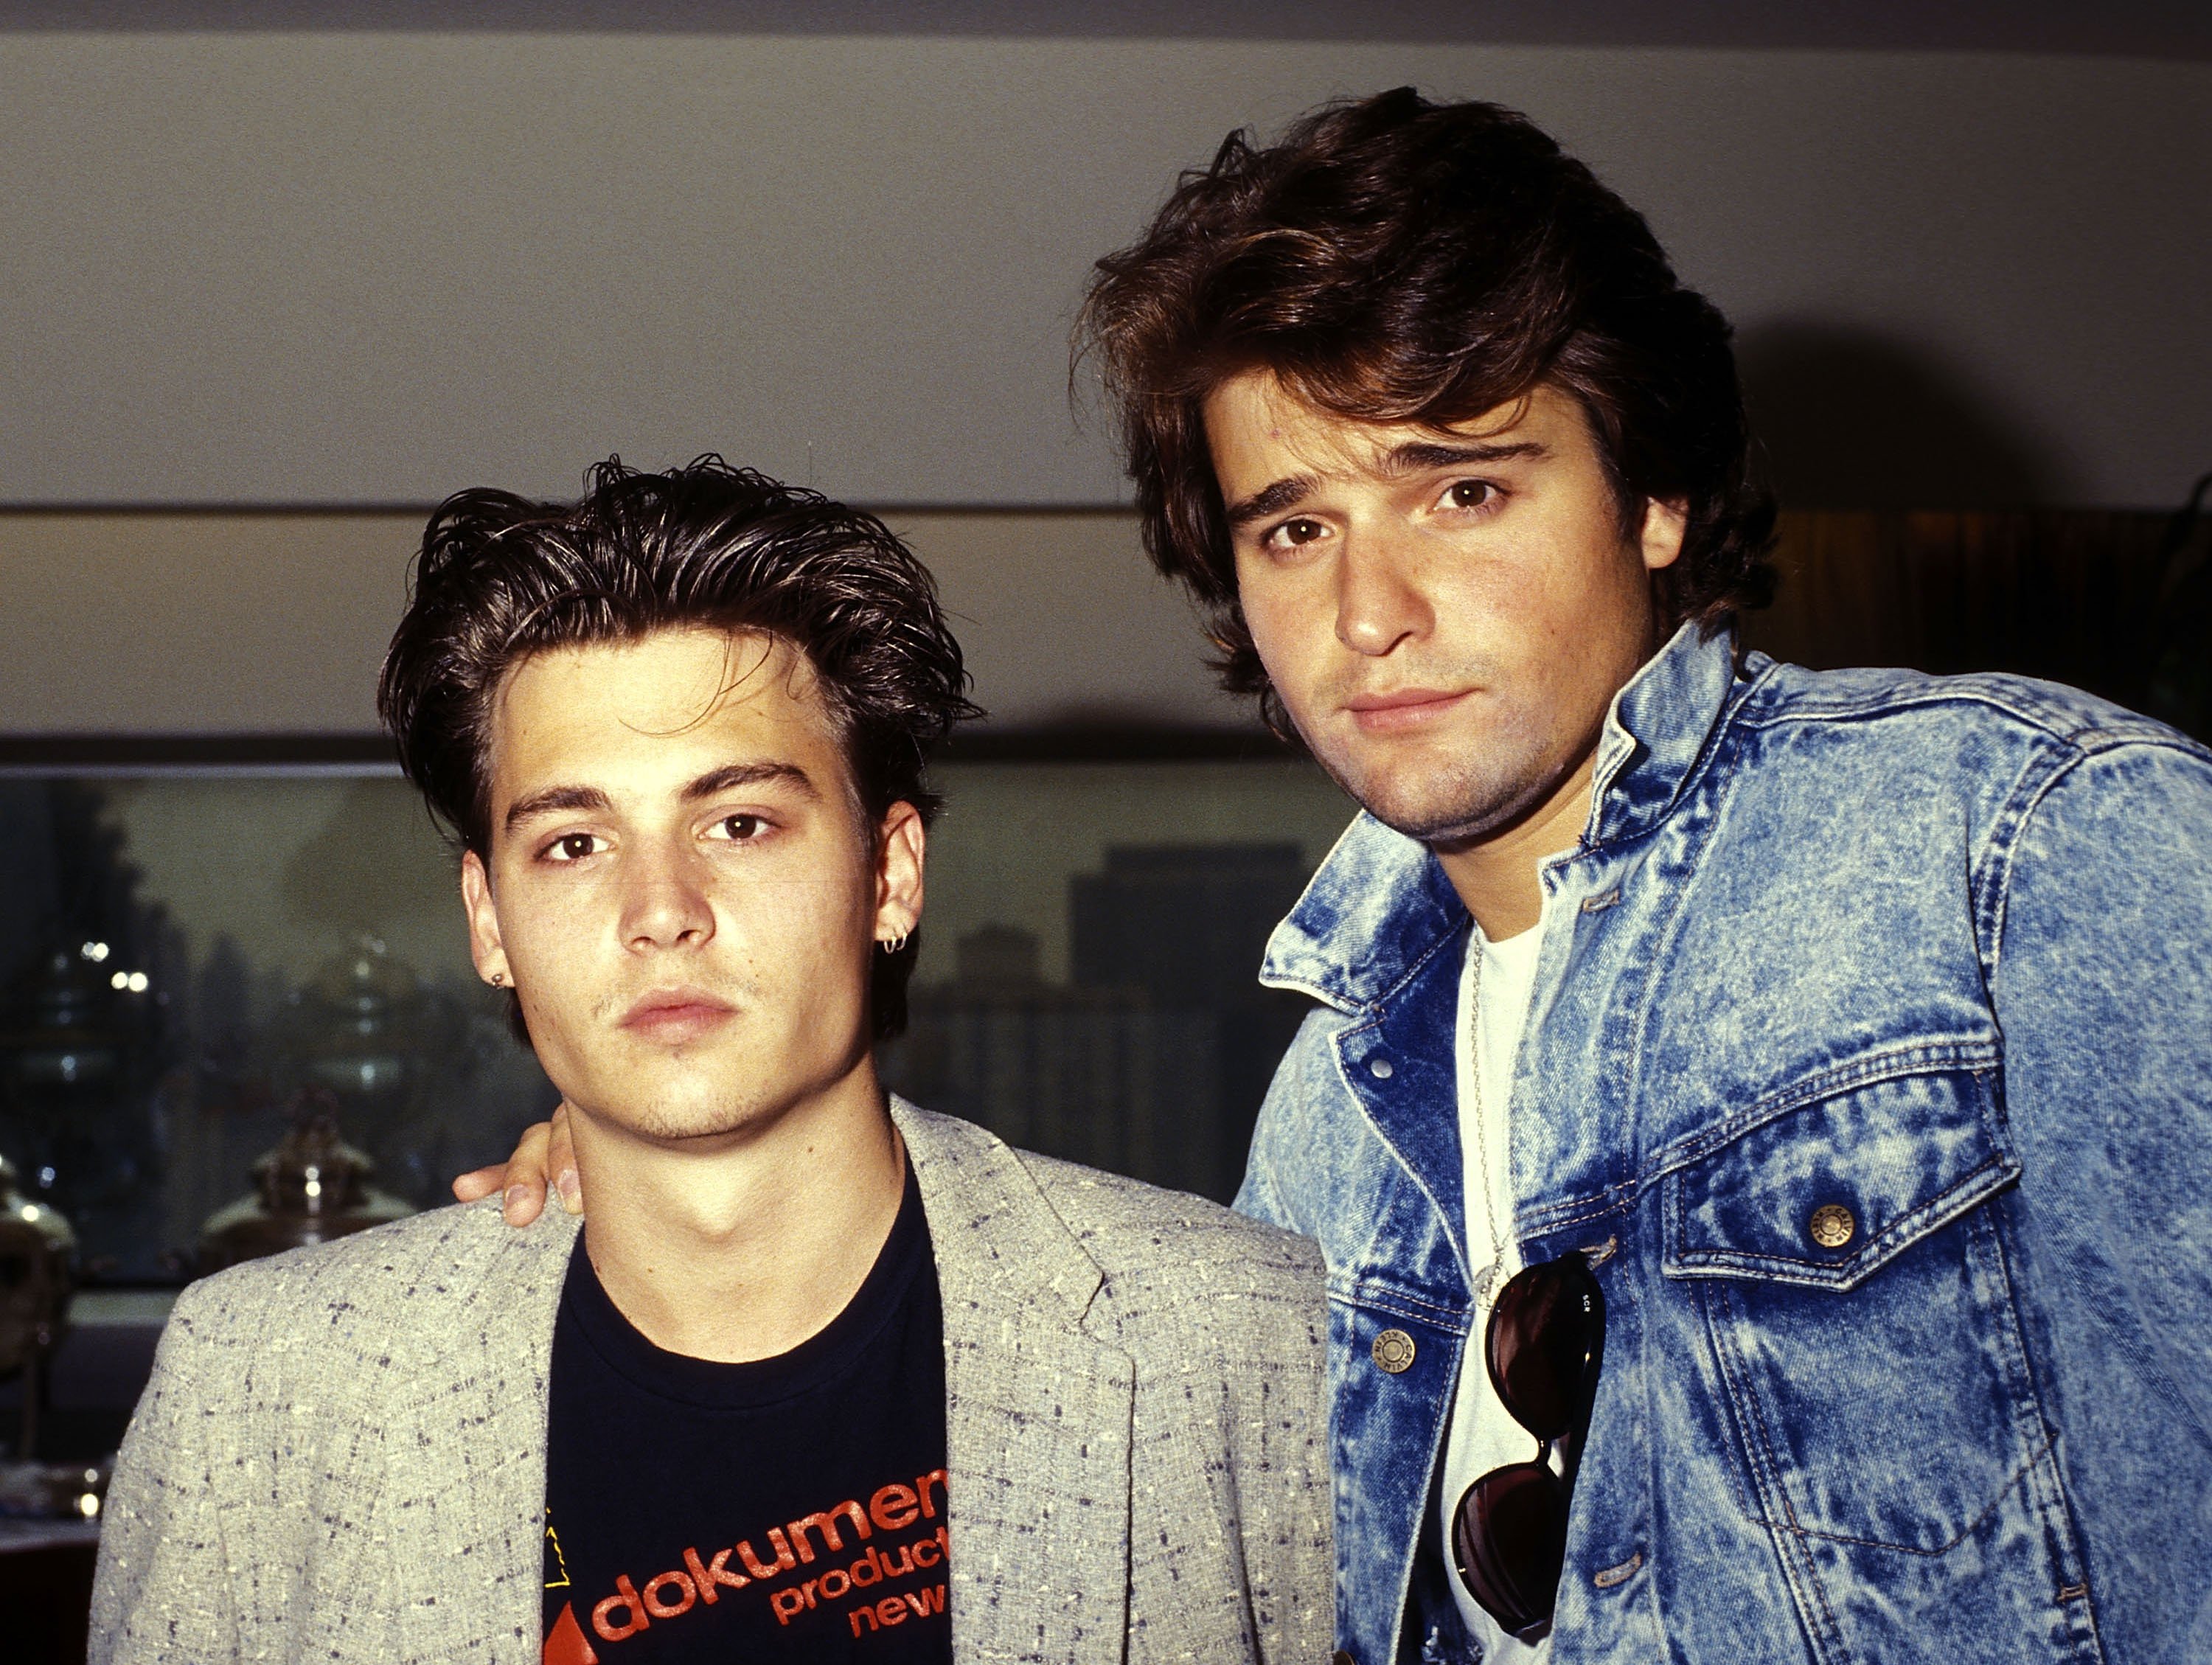 Johnny Depp and actor Peter DeLuise